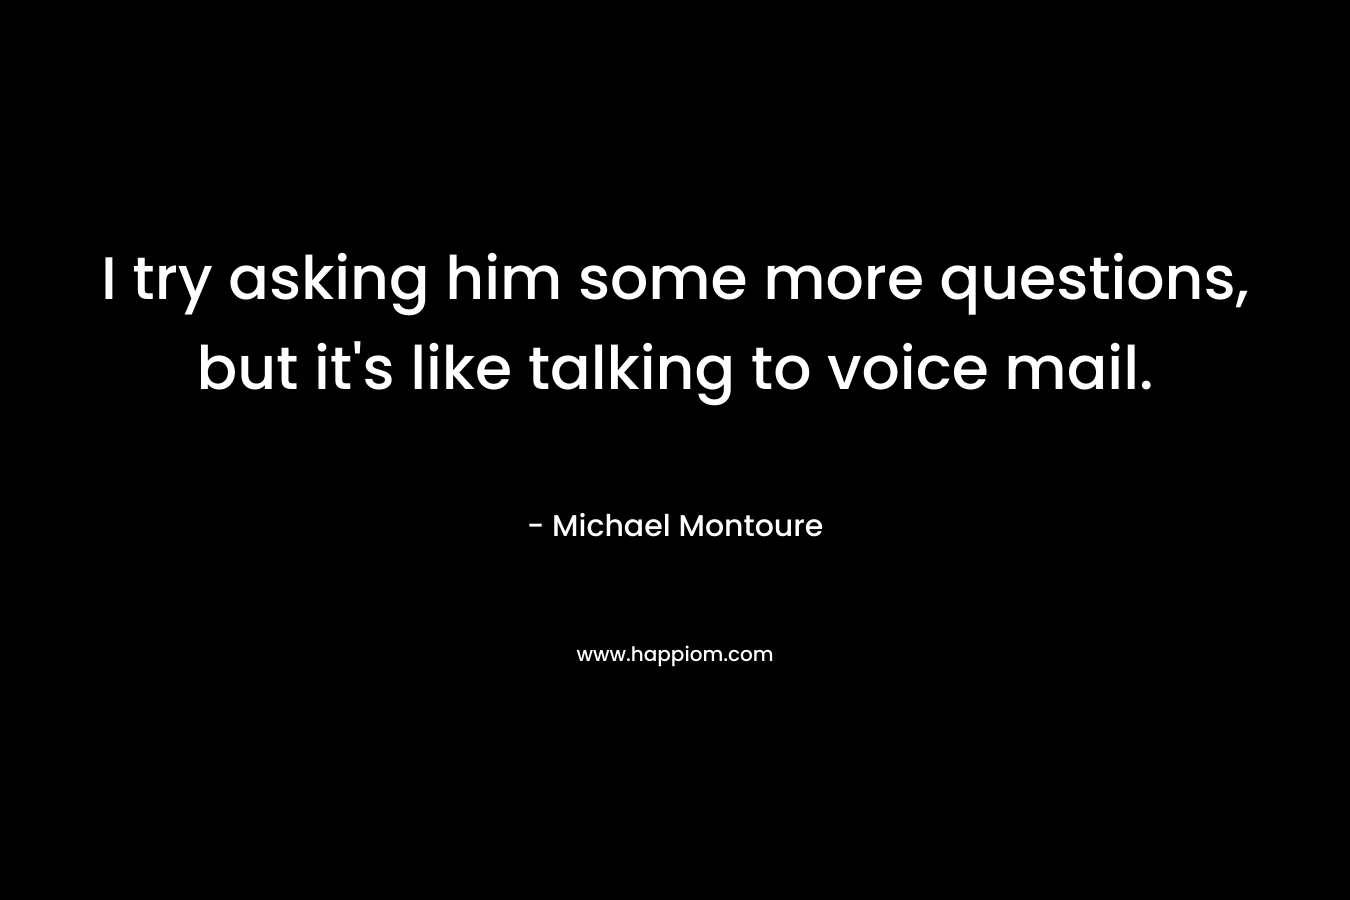 I try asking him some more questions, but it’s like talking to voice mail. – Michael Montoure